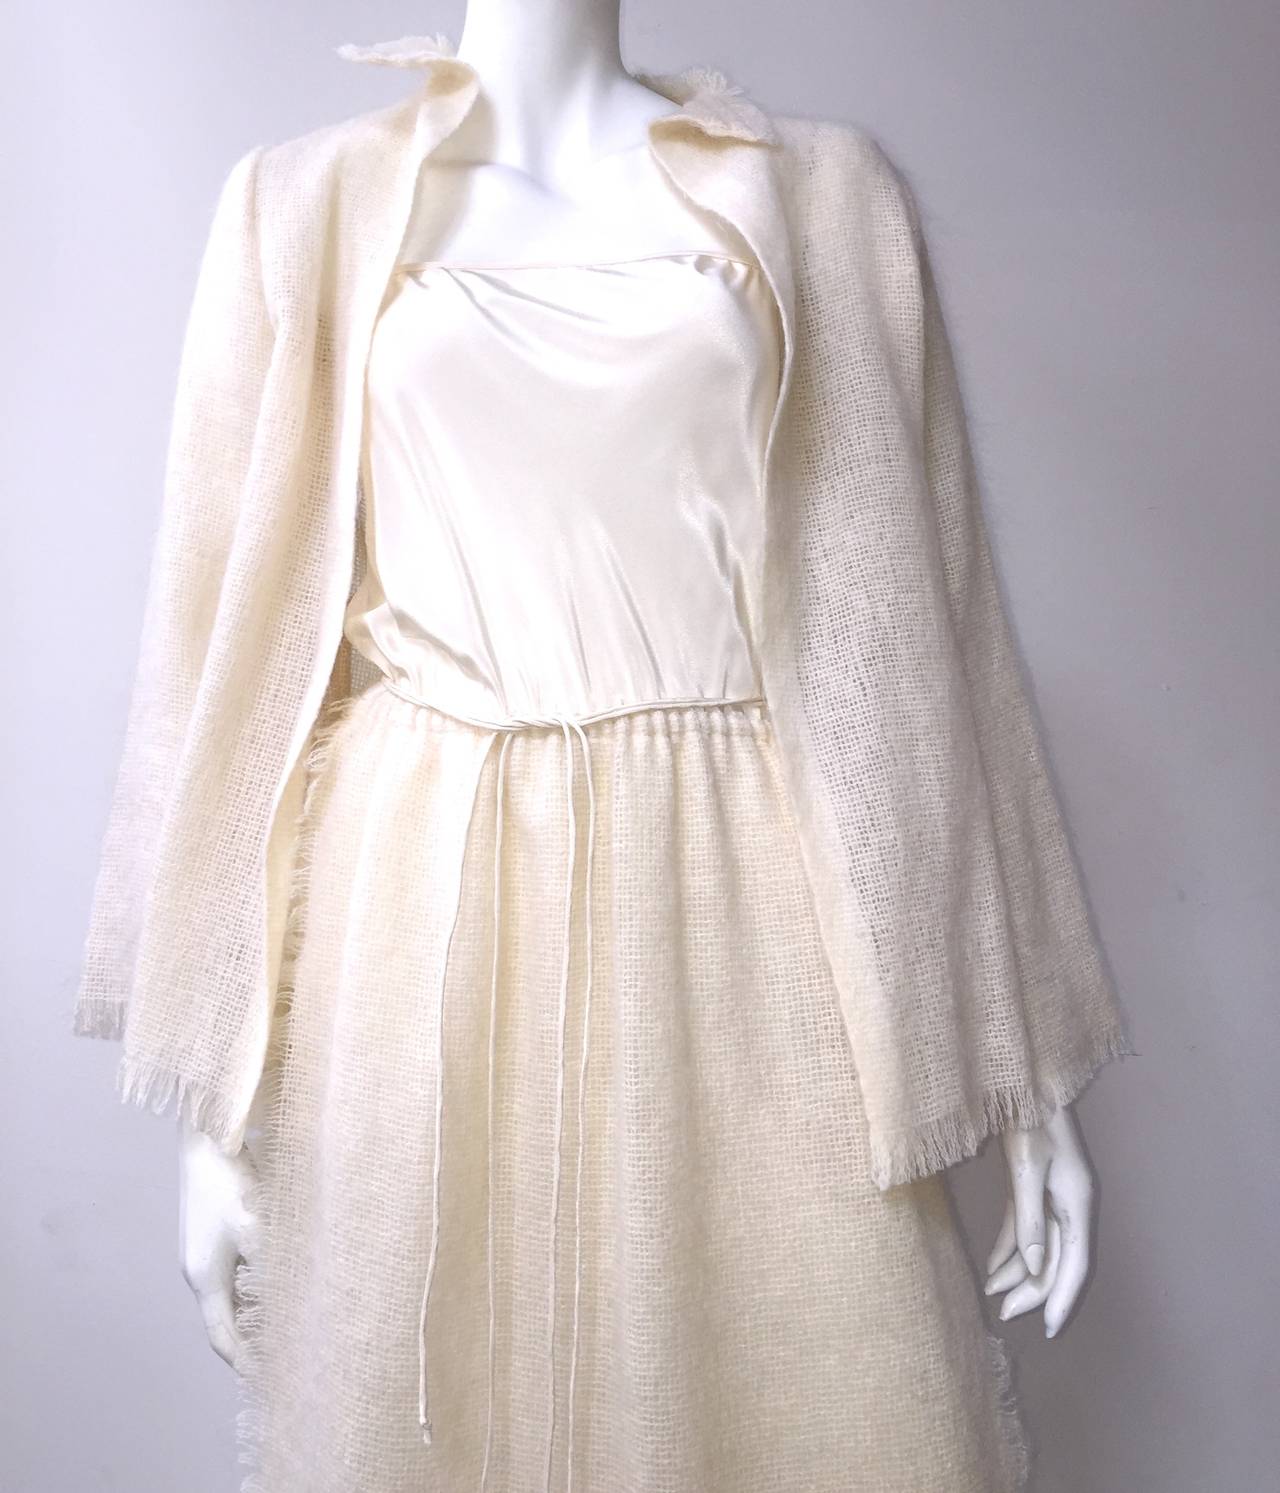 Stunning Alfred Fiandaca Couturier 1980s silk / mohair dress with matching jacket is labeled a size 8 and fits like an USA size 6.  Ladies please grab your tape measure so you can properly measure your bust, waist & hips to make certain this piece